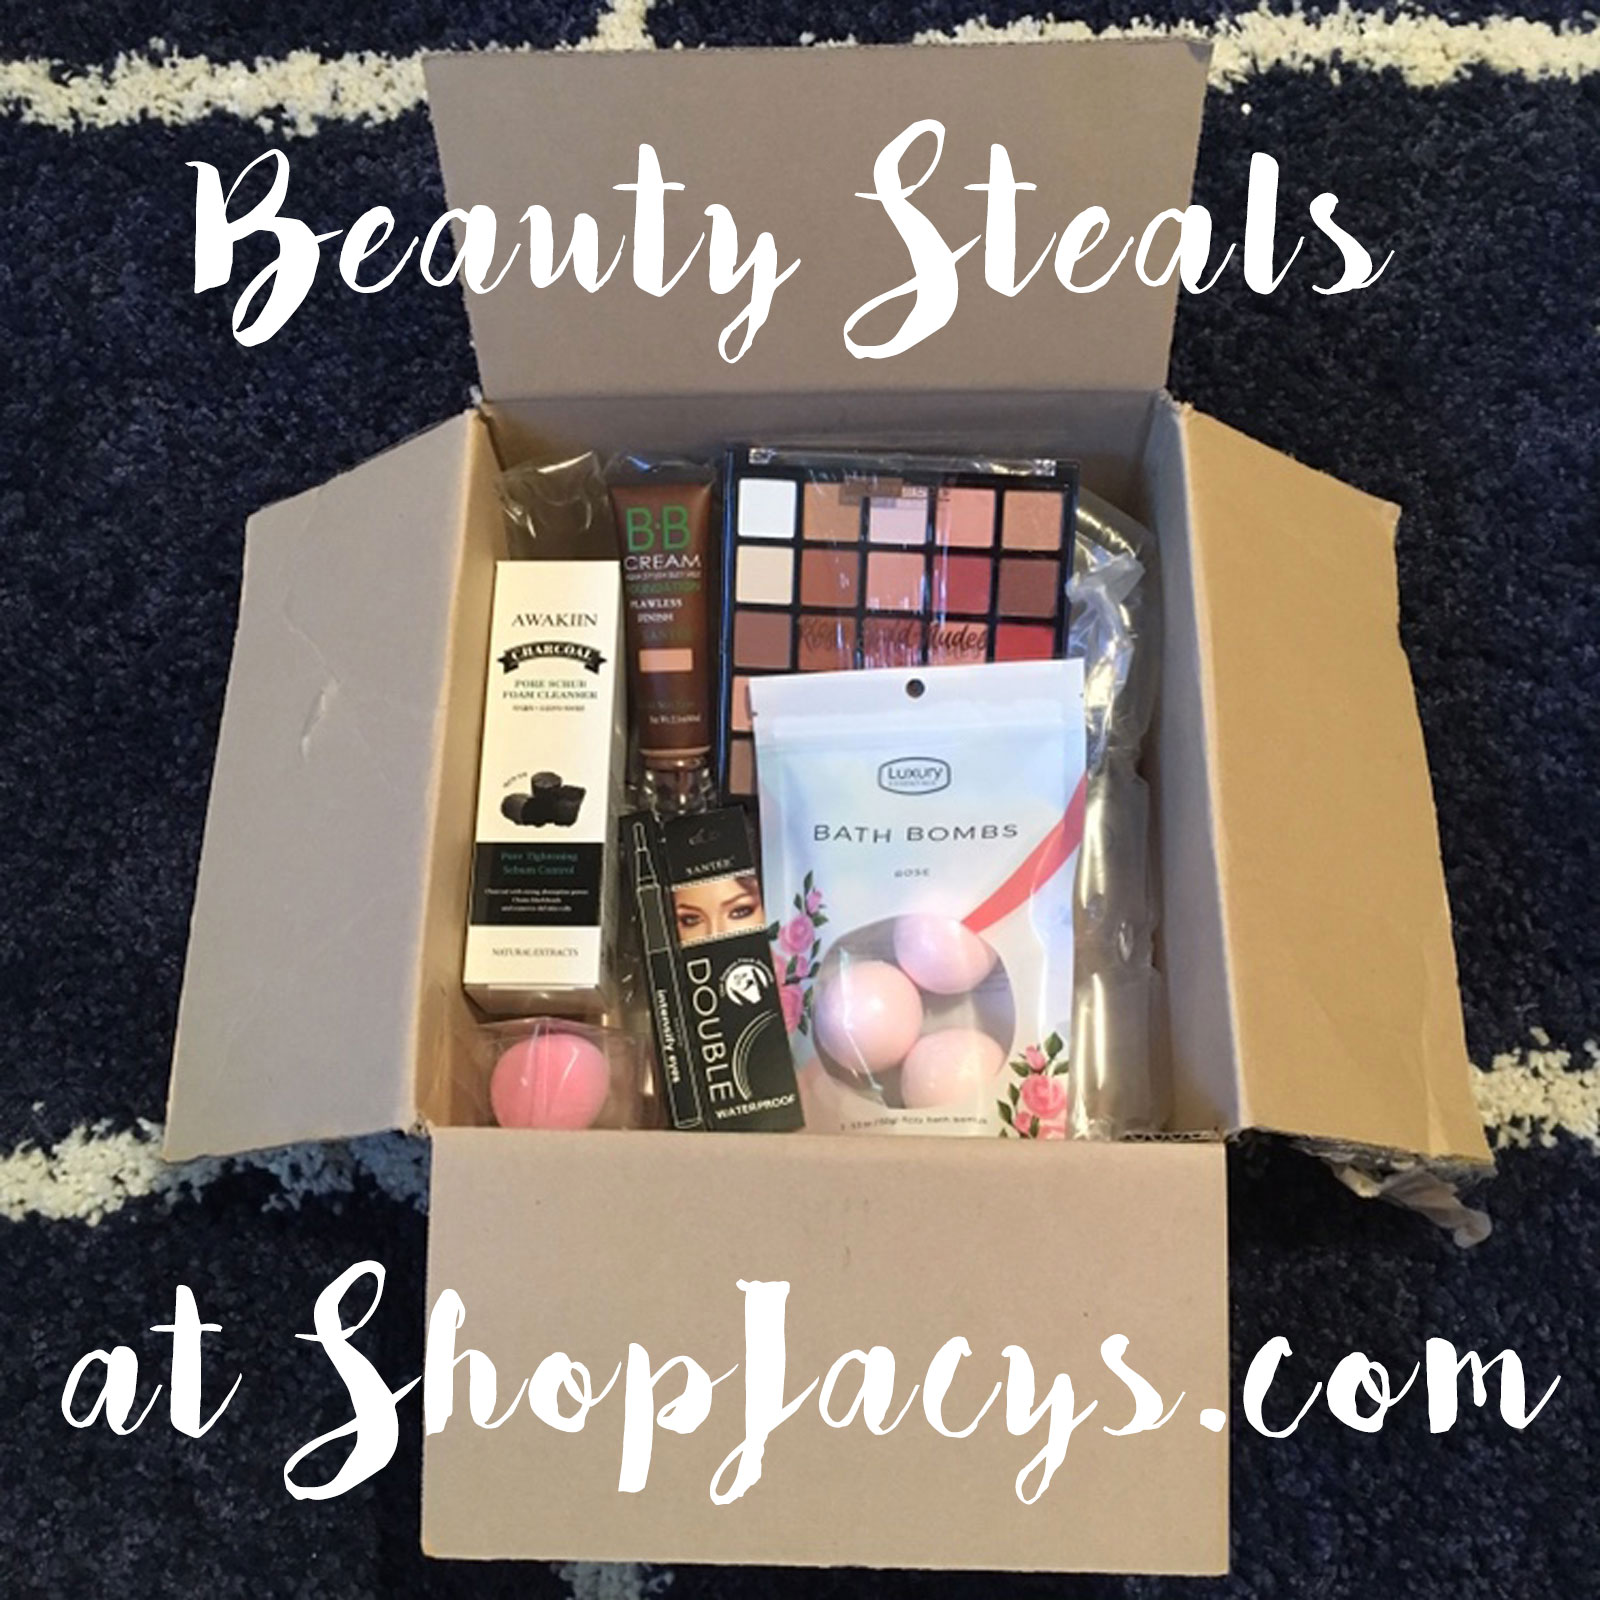 Shop Jacys Review: Beauty bargains mostly from $2 - $7, nothing over $20!